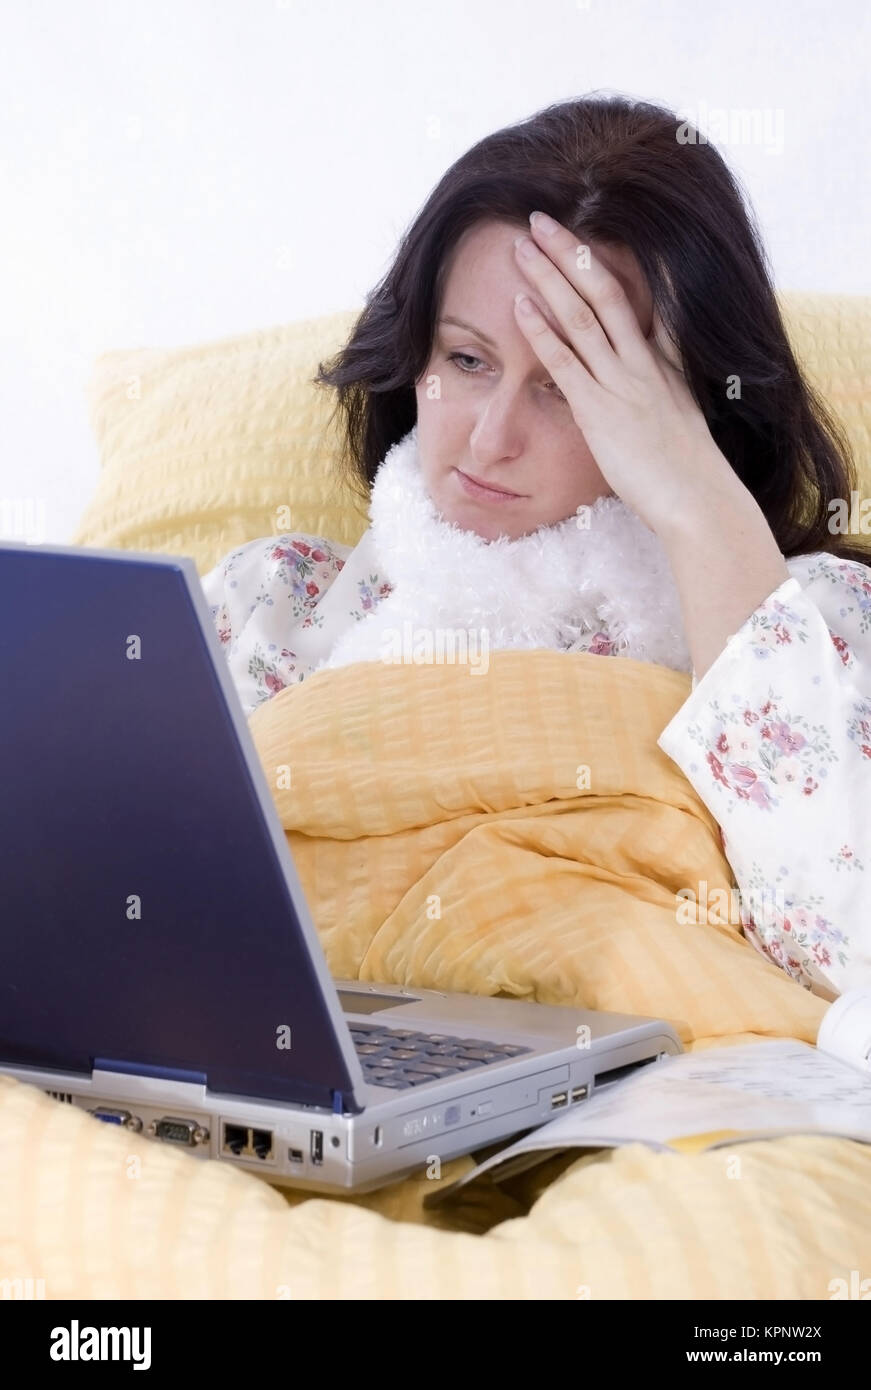 Model release , Krabke, junge Frau liegt mit Laptop im Bett - sick, young woman with laptop in bed Stock Photo